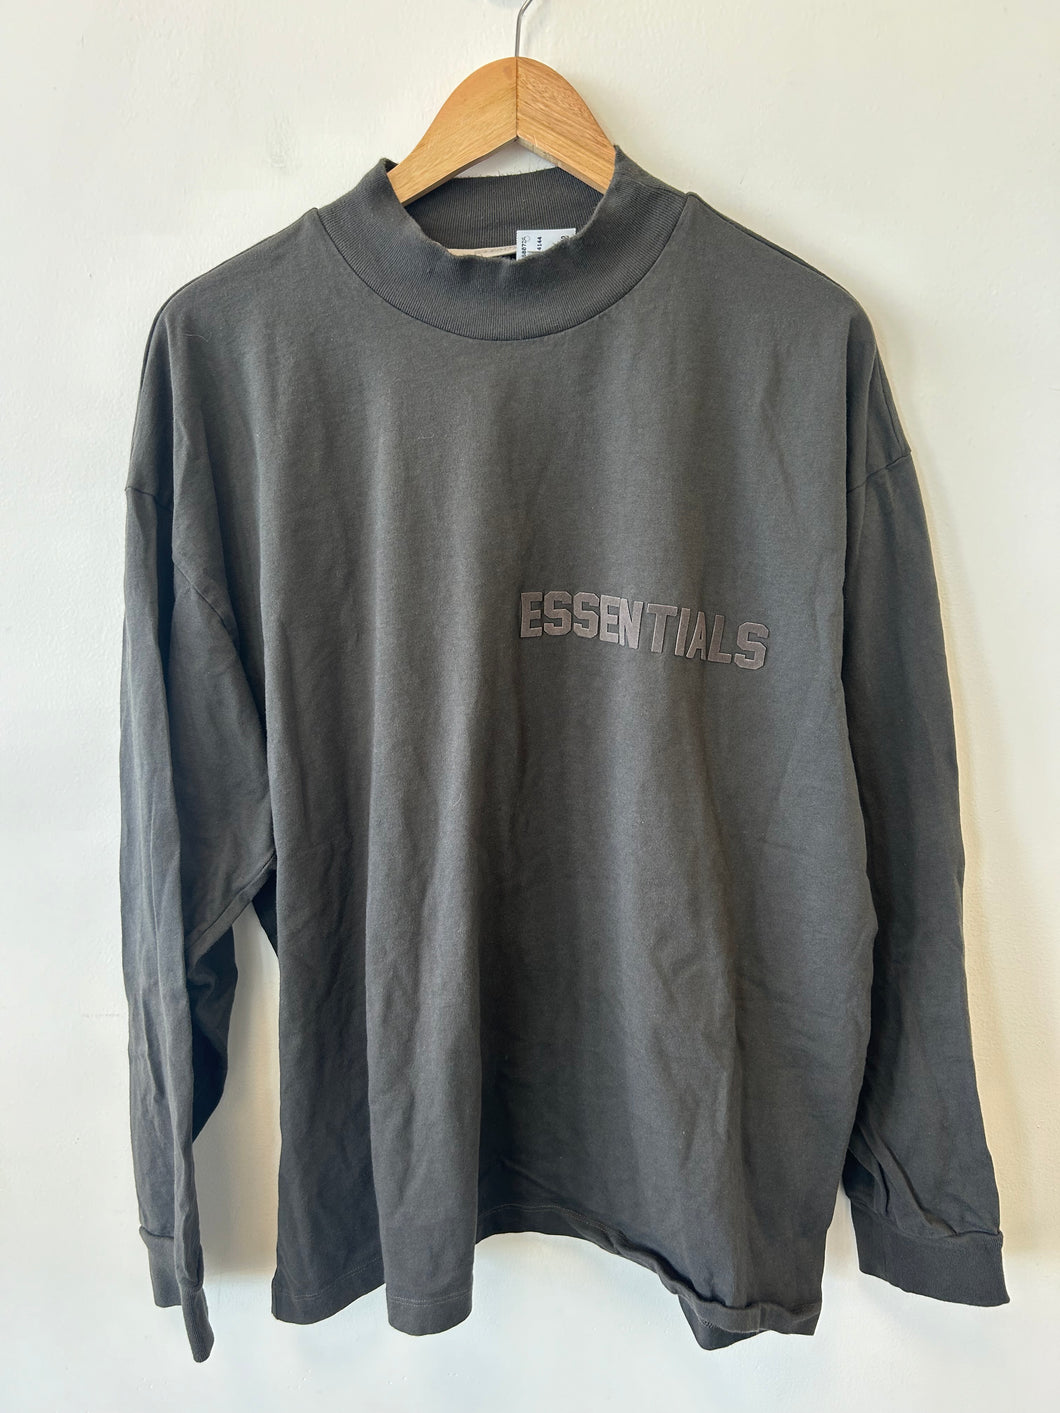 Fear Of God Essentials Long Sleeve Top Size Large